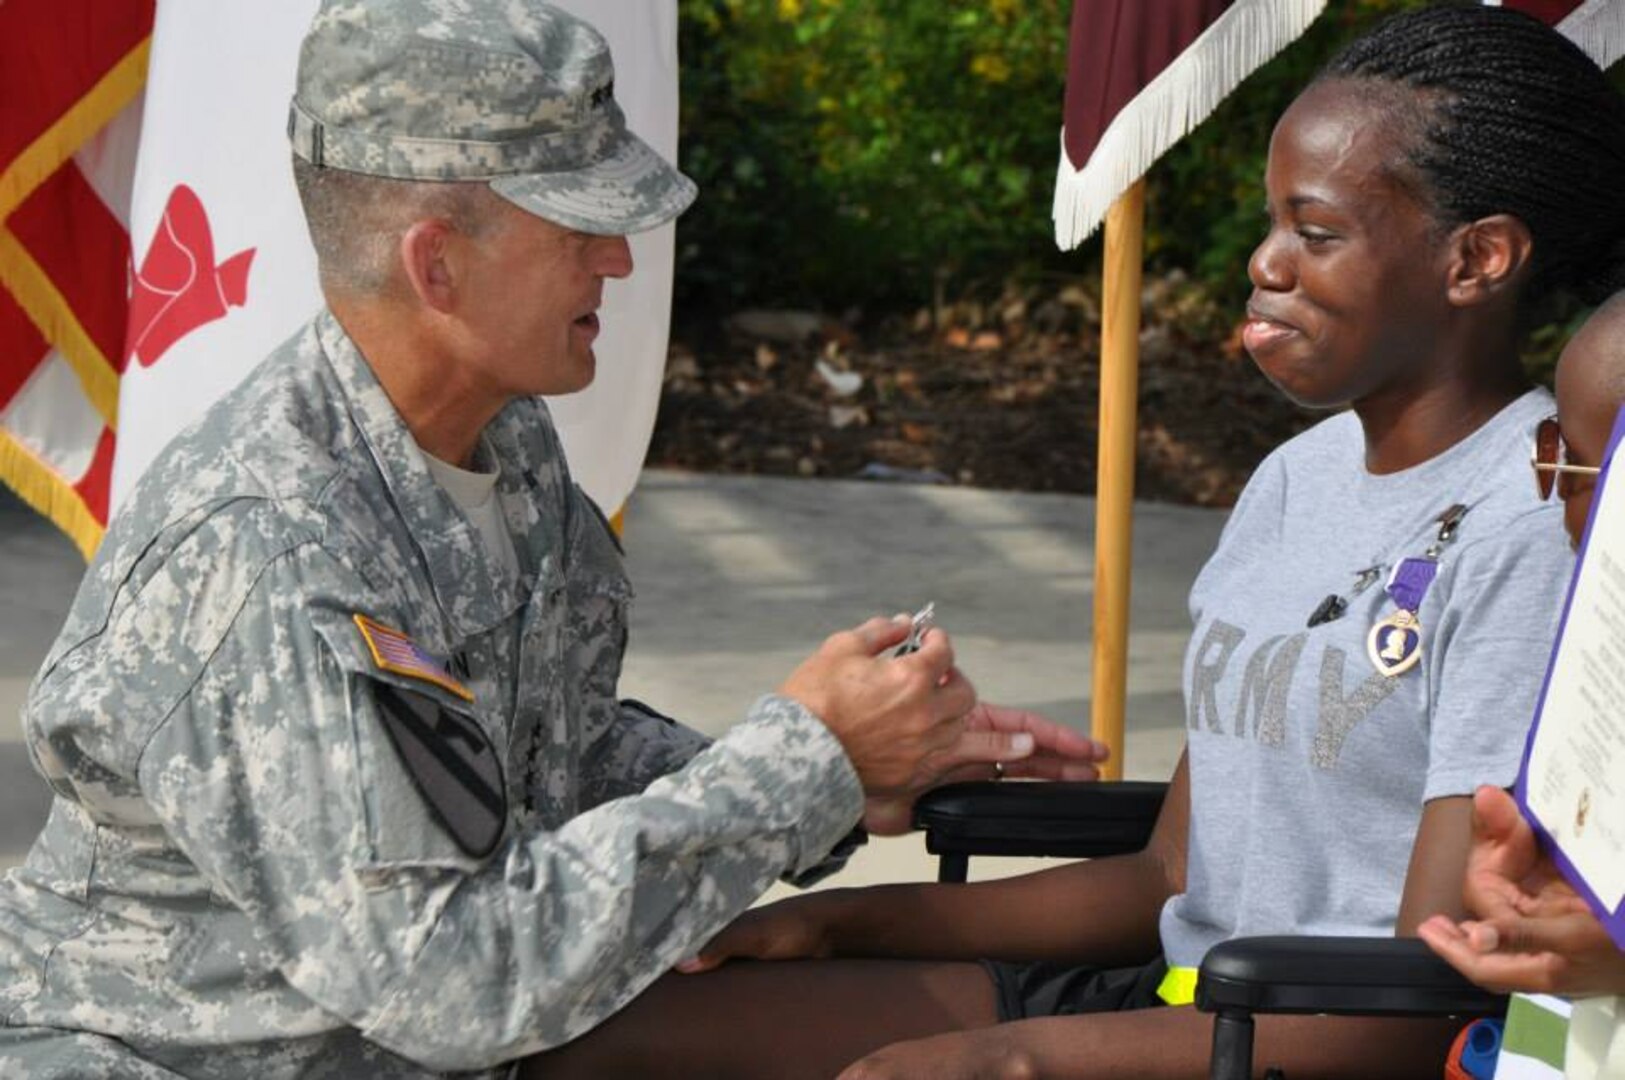 Gen. Daniel B. Allyn (left), commanding general of U.S. Army Forces Command, presents a Purple Heart medal to Pfc. Cicely Holmes during a ceremony at the Warrior and Family Support Center Aug. 13. She also received the Combat Medical Badge and Combat Action Badge. Holmes was injured July 23 while conducting a route clearance mission when her vehicle was struck by an improvised explosive device resulting in her combat injuries. Sgt. Stephen Jackel also received the Purple Heart. His vehicle struck an improvised explosive device while on patrol resulting in a double amputation while serving in Afghanistan in August 2011. (Photo by Robert Shields, Brooke Army Medical Center Public Affairs)